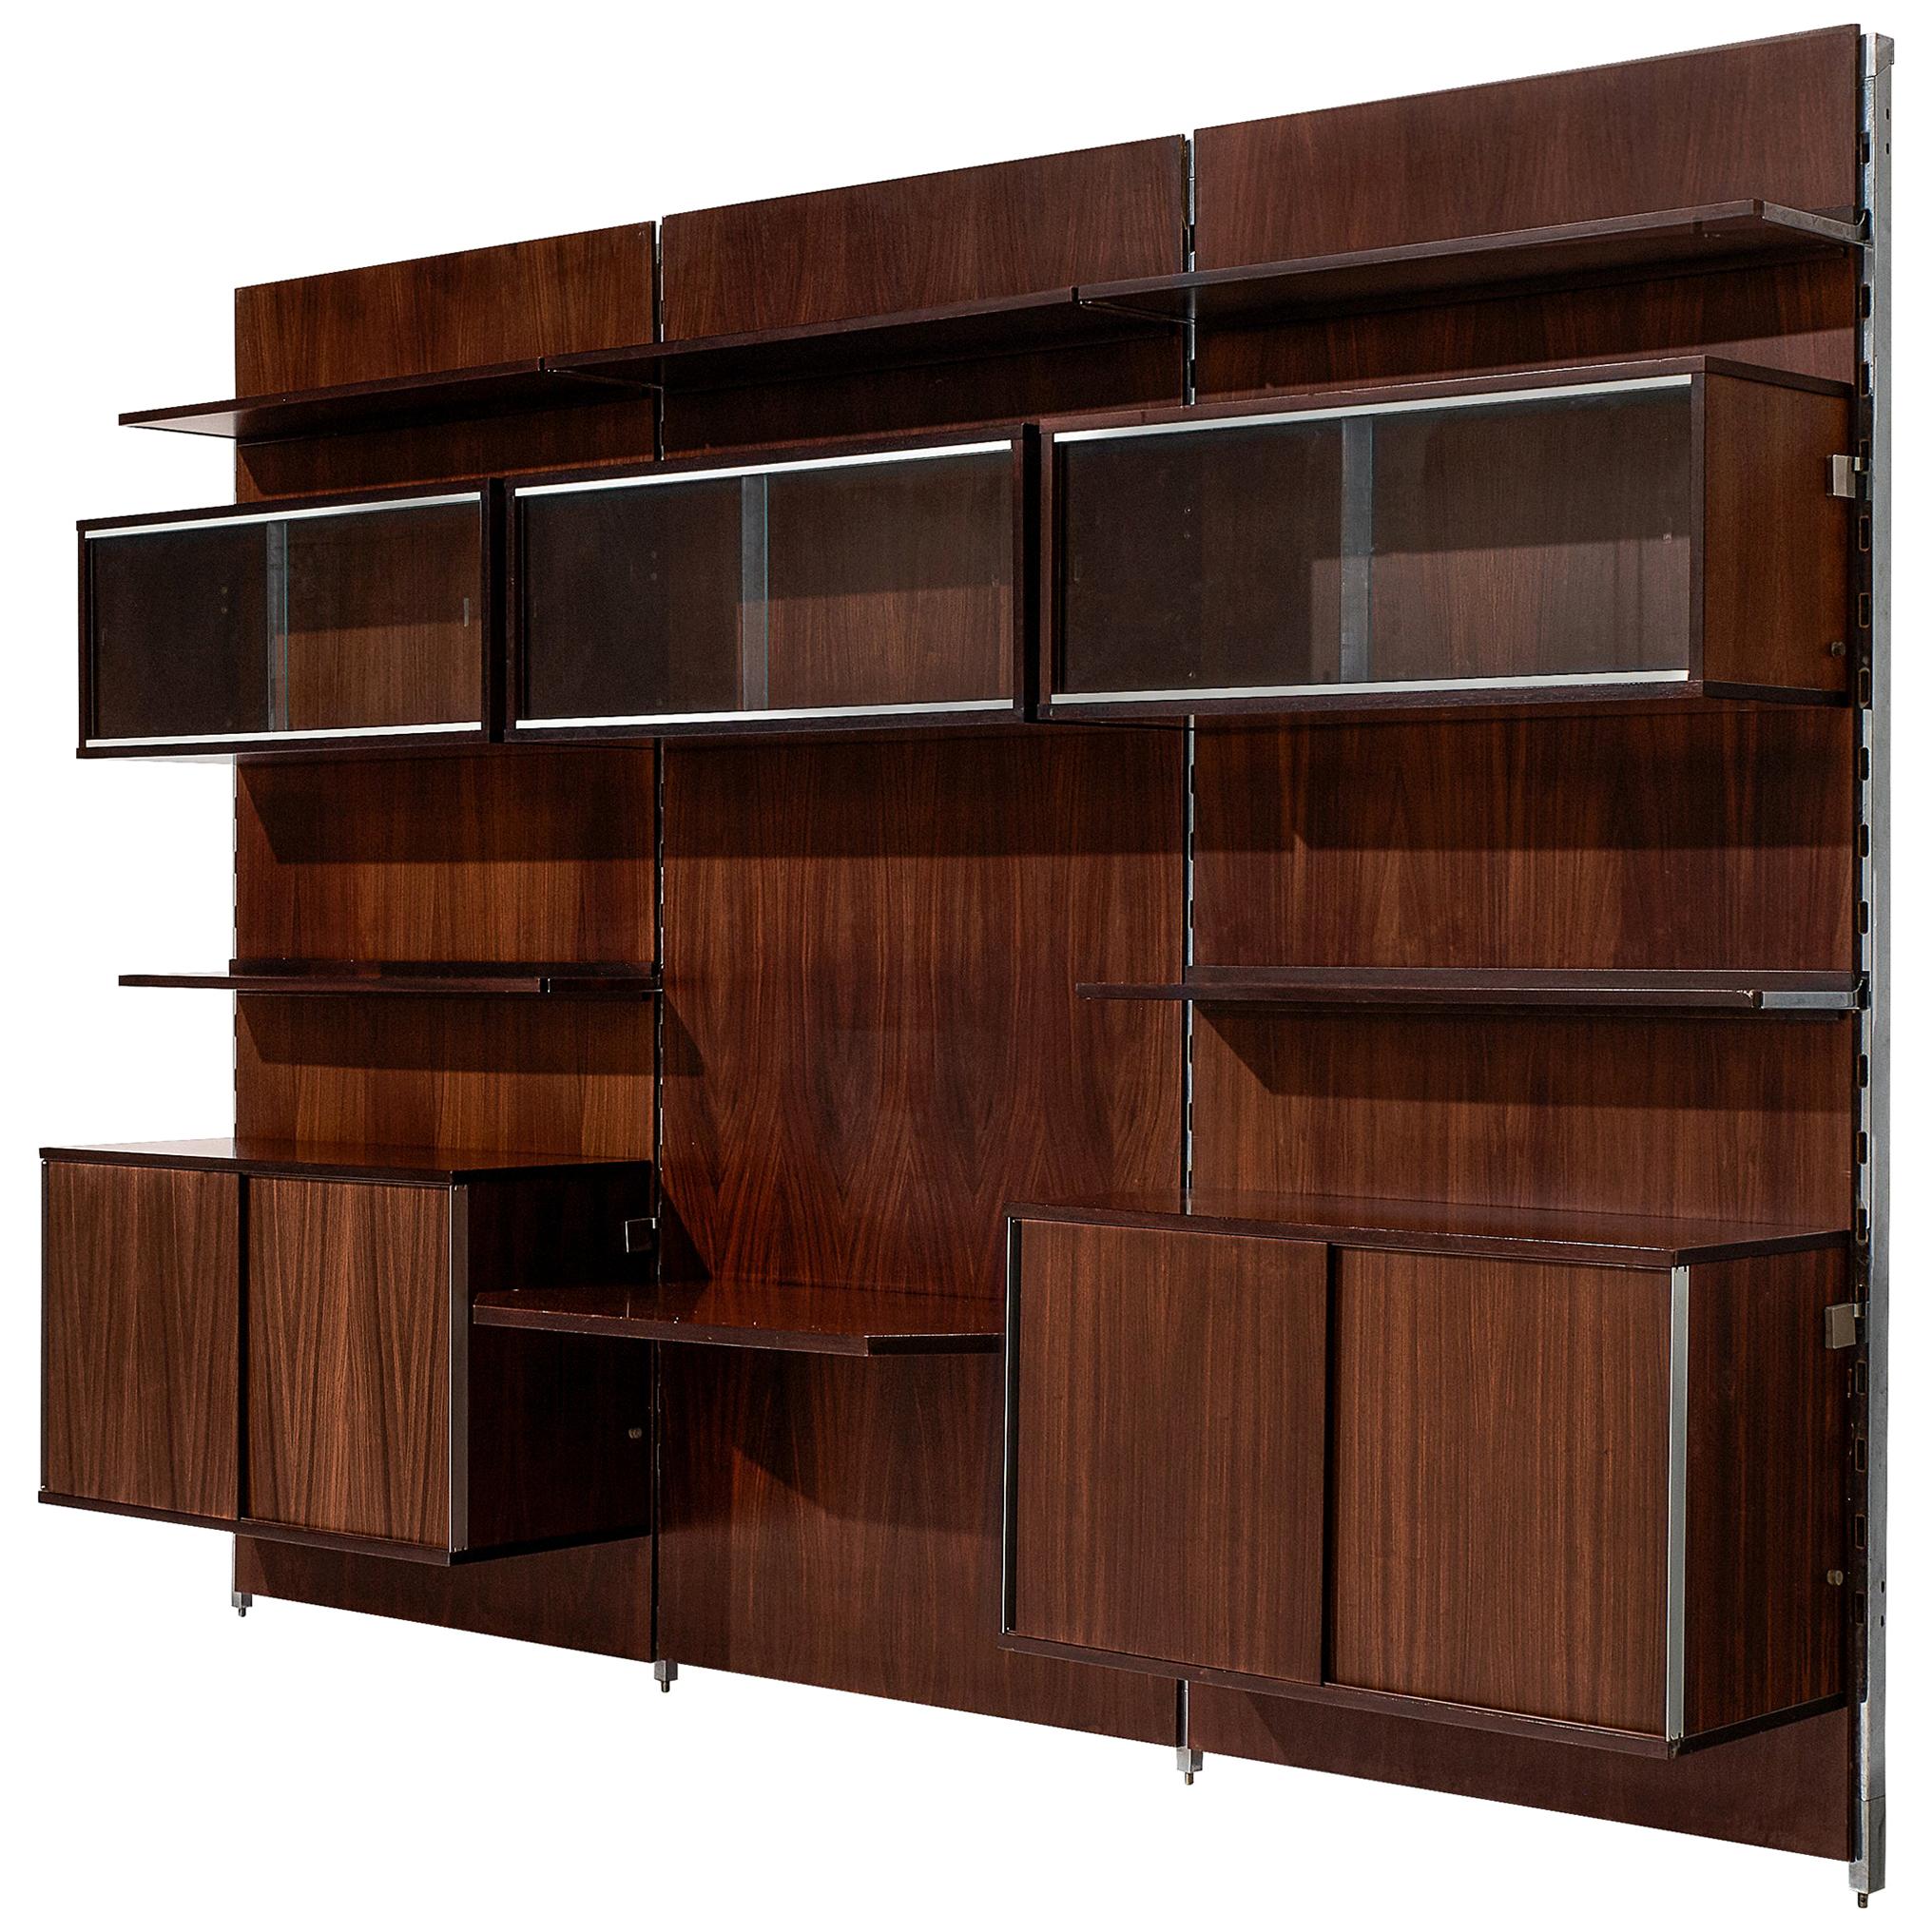 MIM Roma Wall Unit in Rosewood